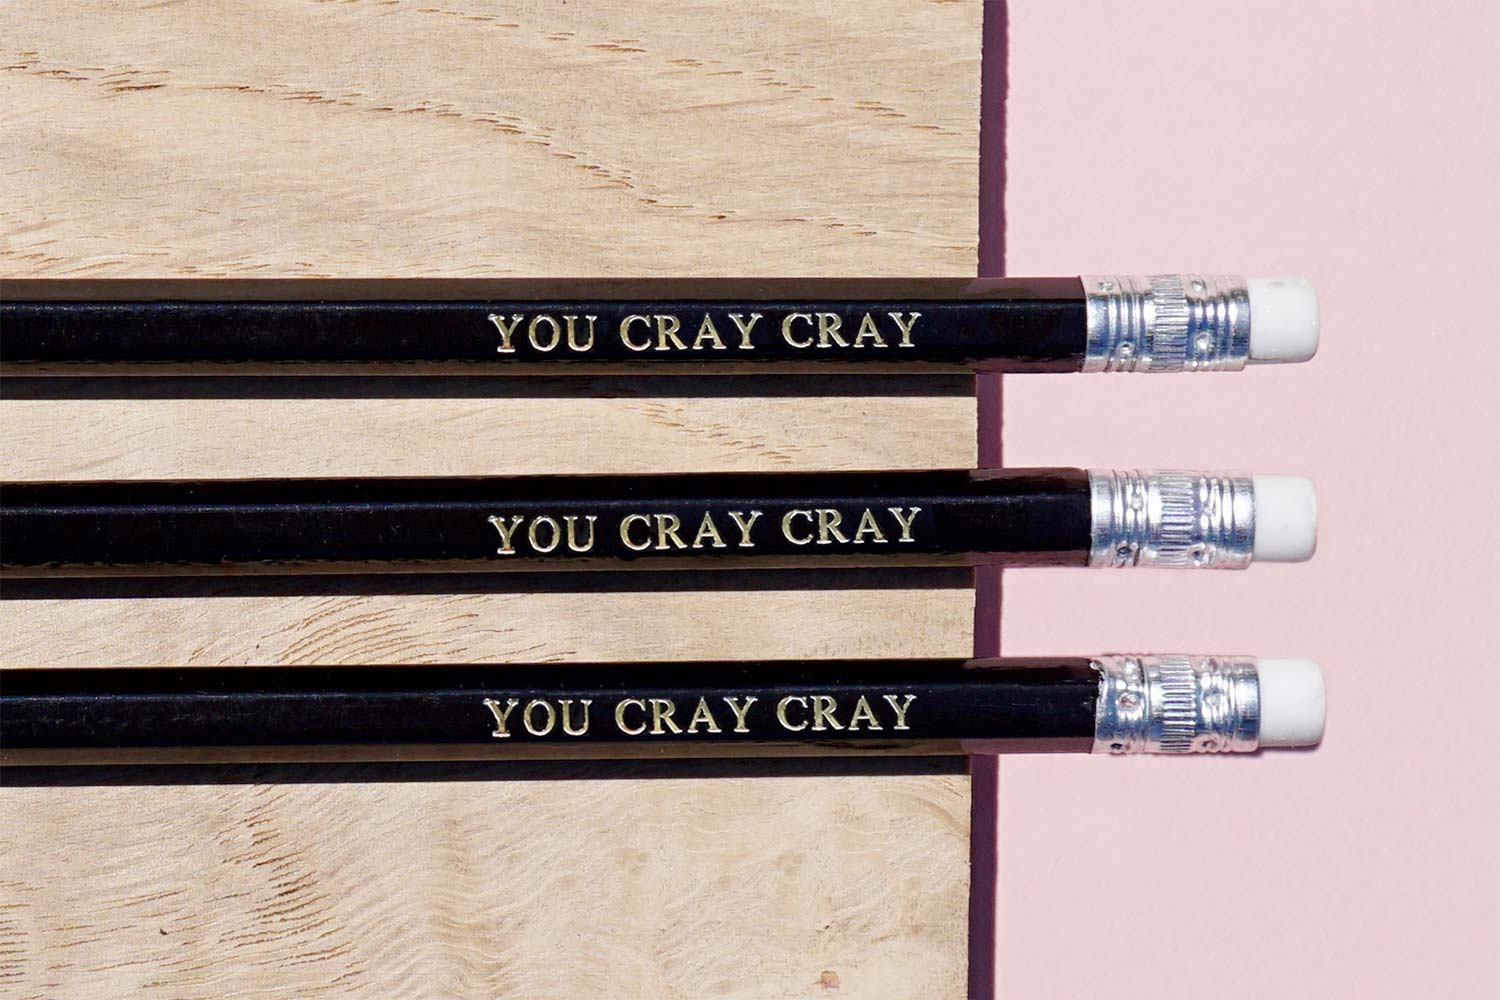 Customized pencils from Bookshell, with the quote 'You cray cray'